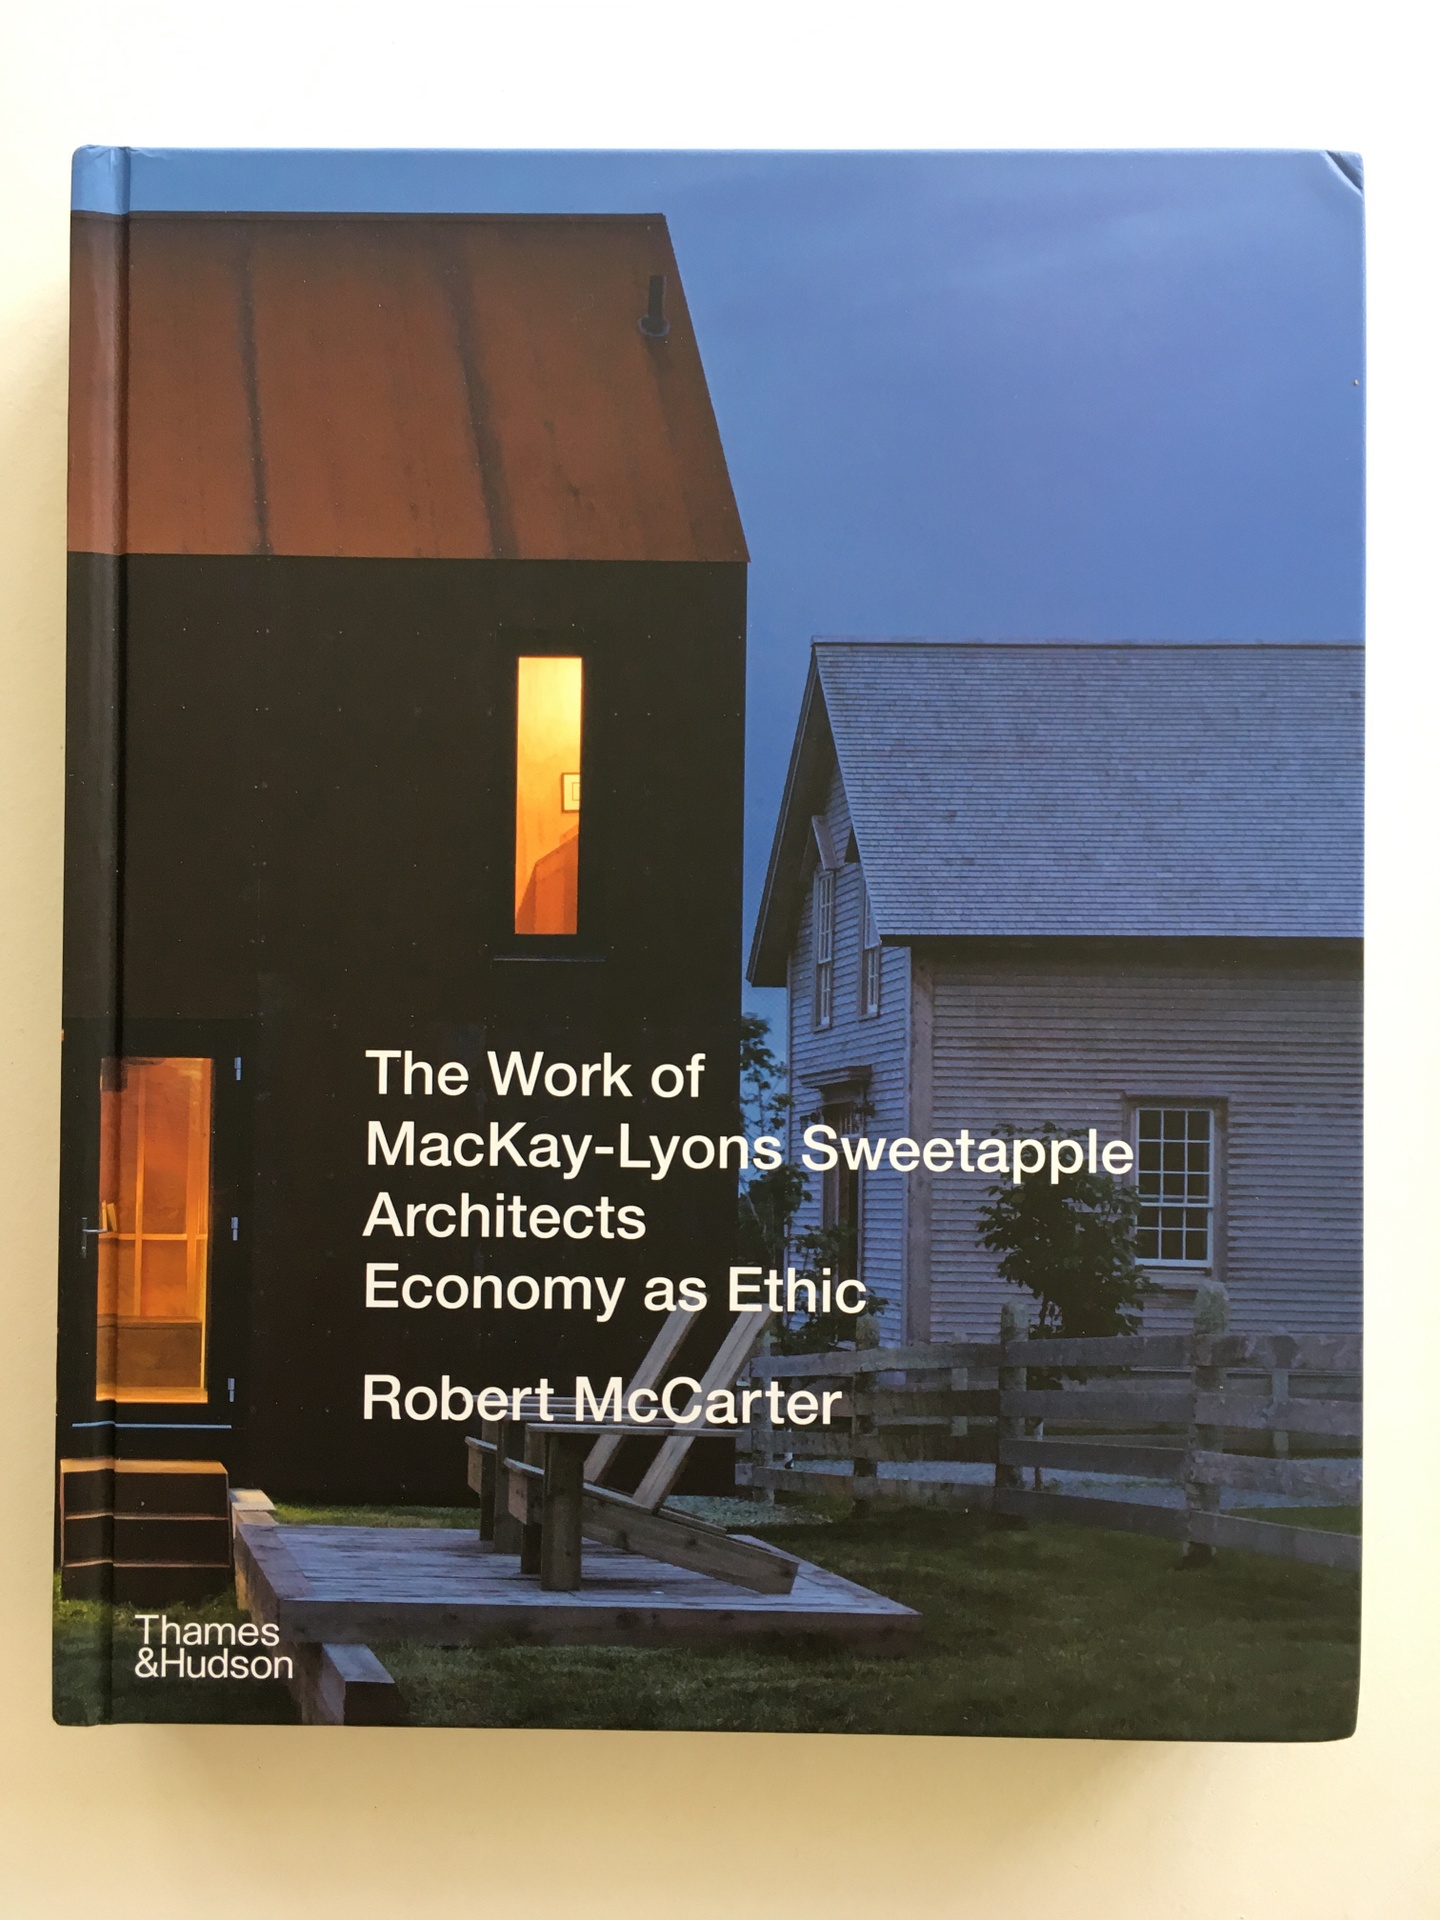 Cover of The Work of MacKay-Lyons Sweetapple Architects: Economy as Ethic, featuring a photo of two homes at dusk.